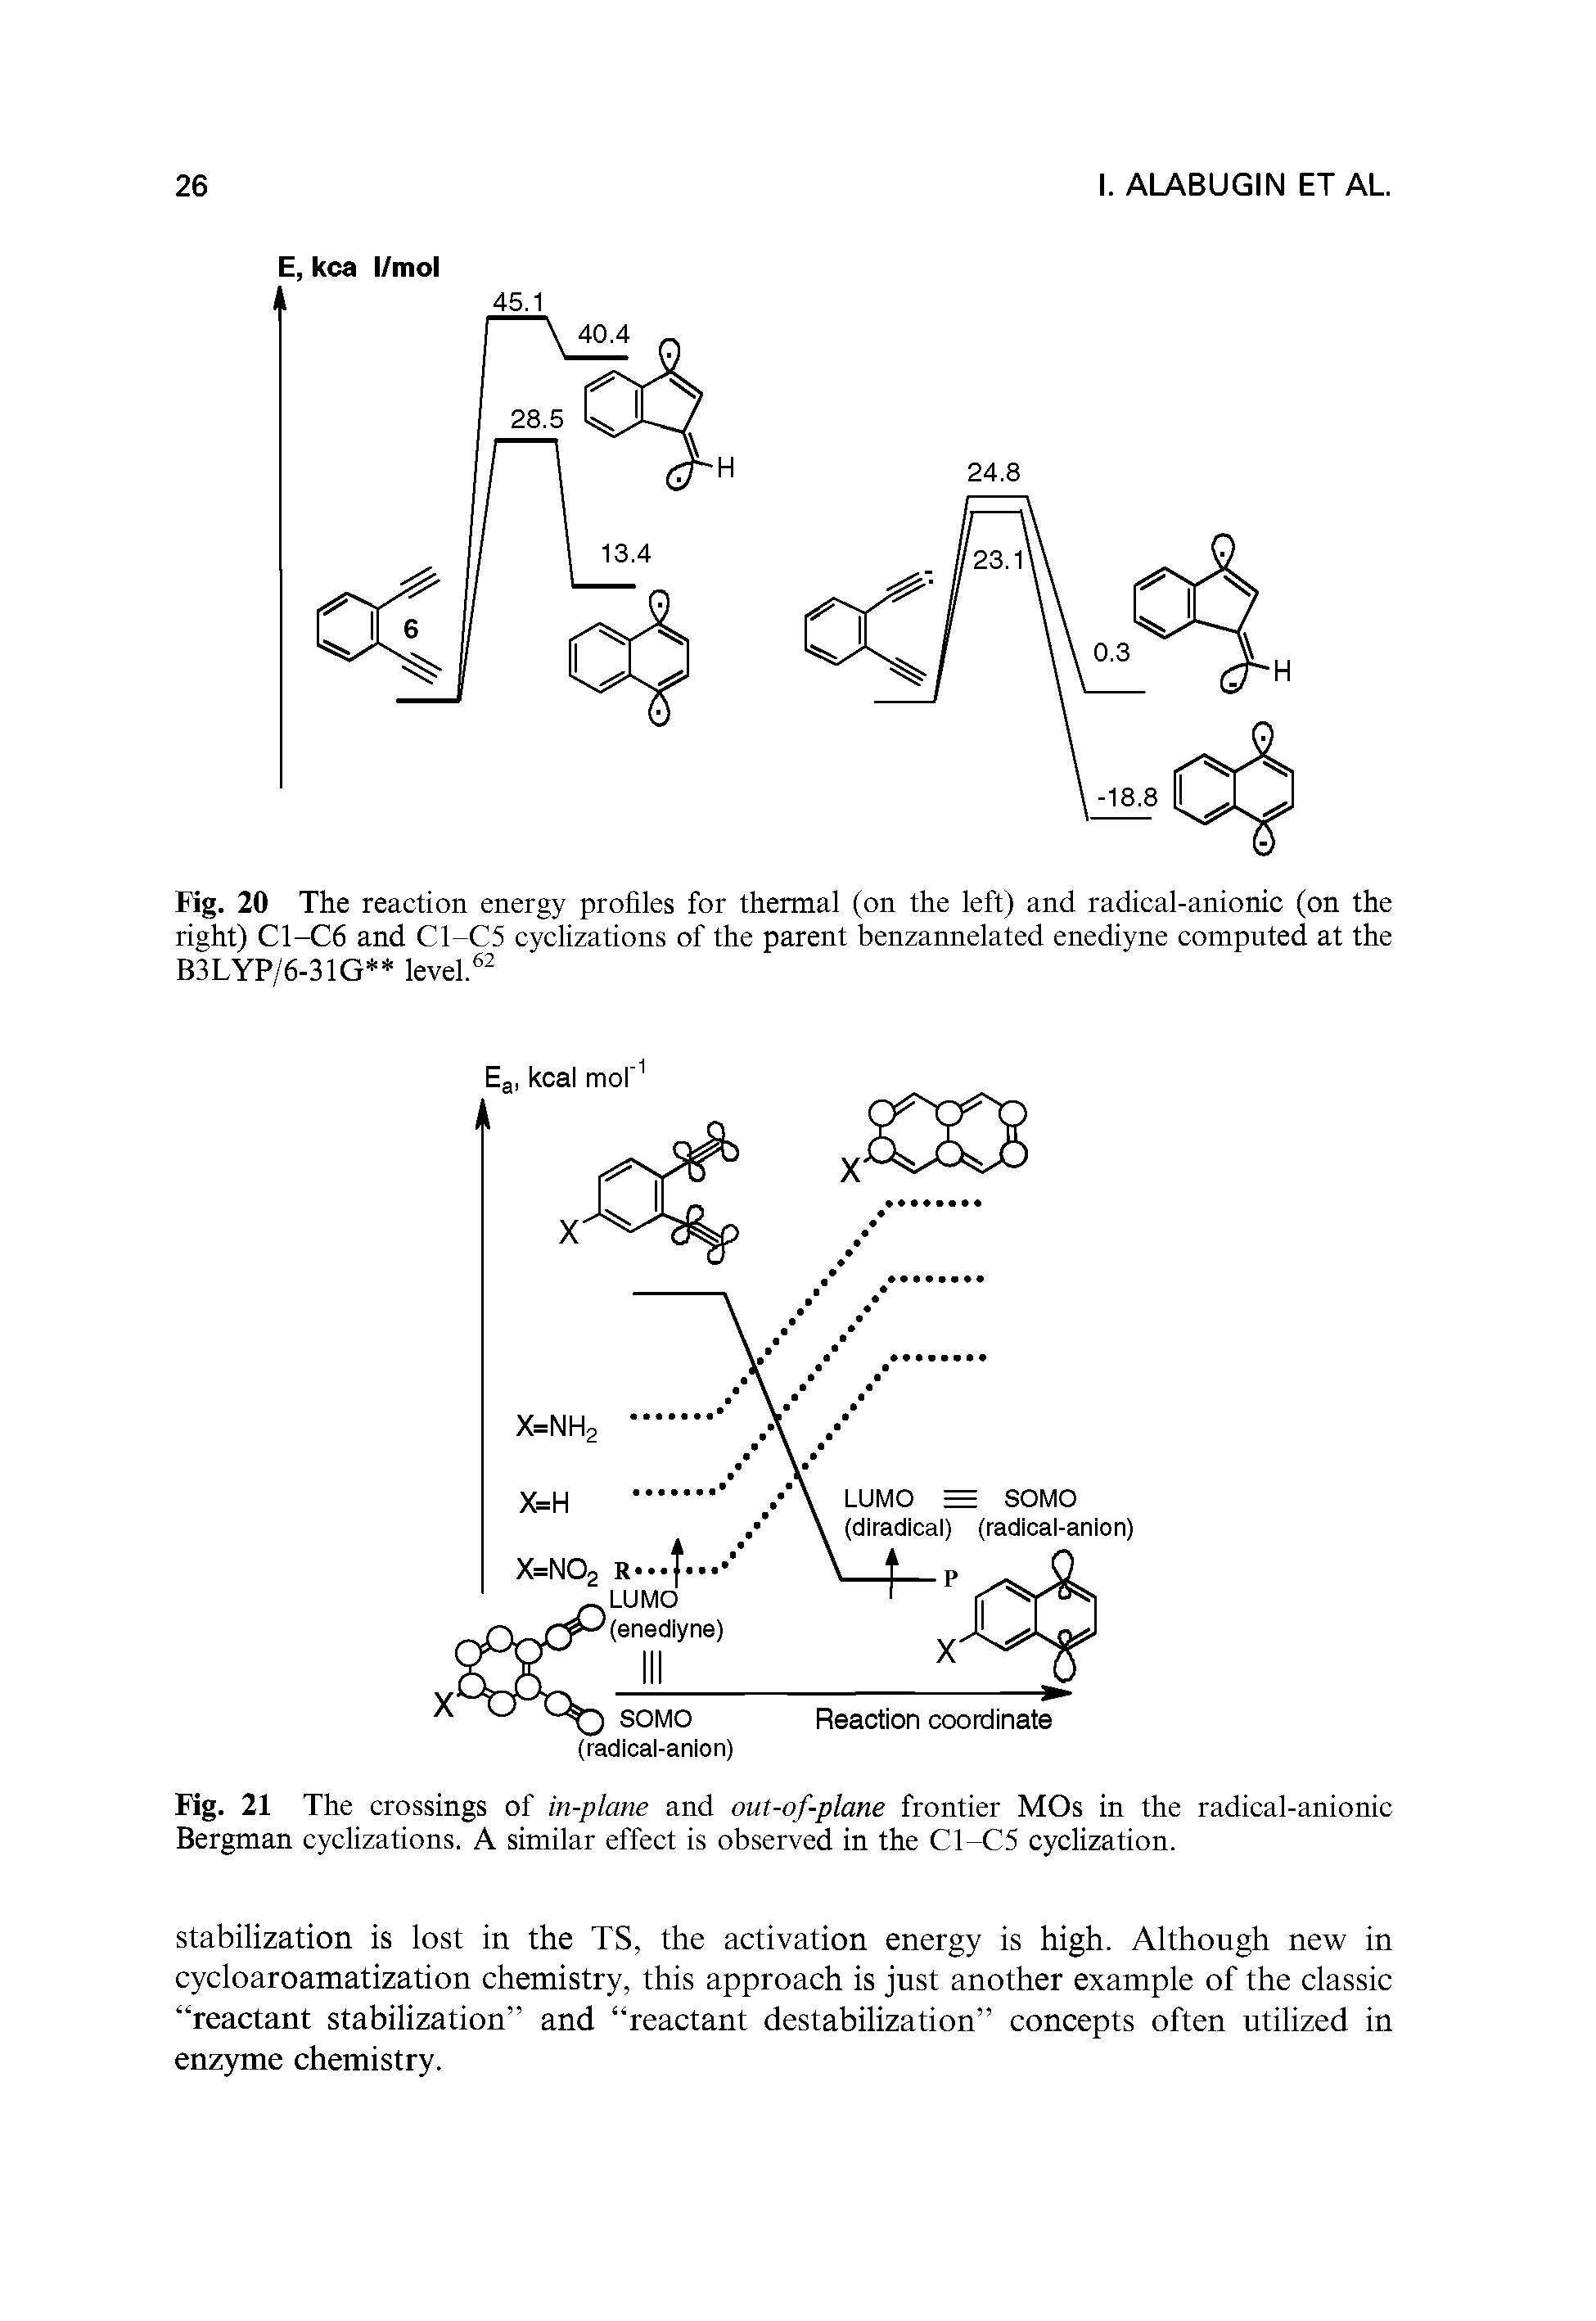 Fig. 20 The reaction energy profiles for thermal (on the left) and radical-anionic (on the right) C1-C6 and C1-C5 cyclizations of the parent benzannelated enediyne computed at the B3LYP/6-31G level.62...